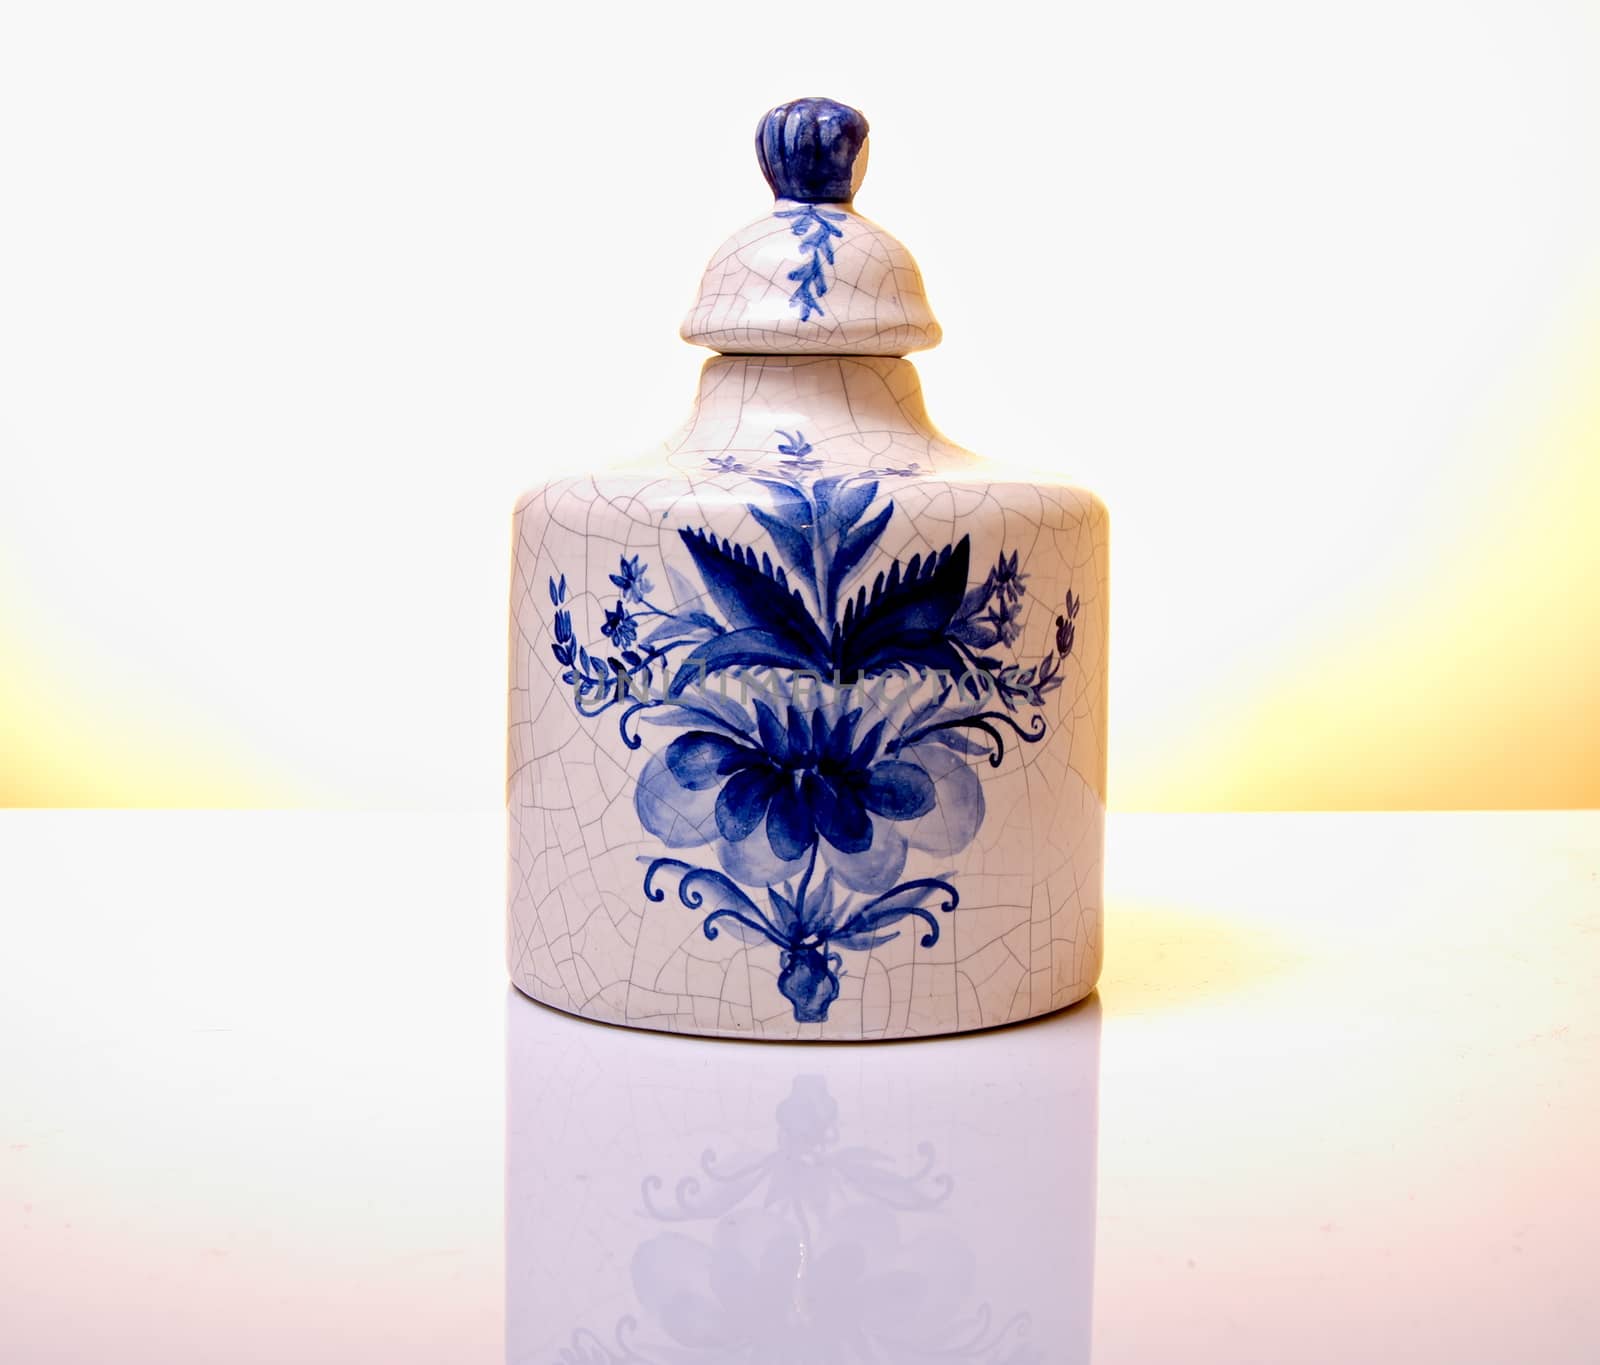 Old white and blue pot by anderm